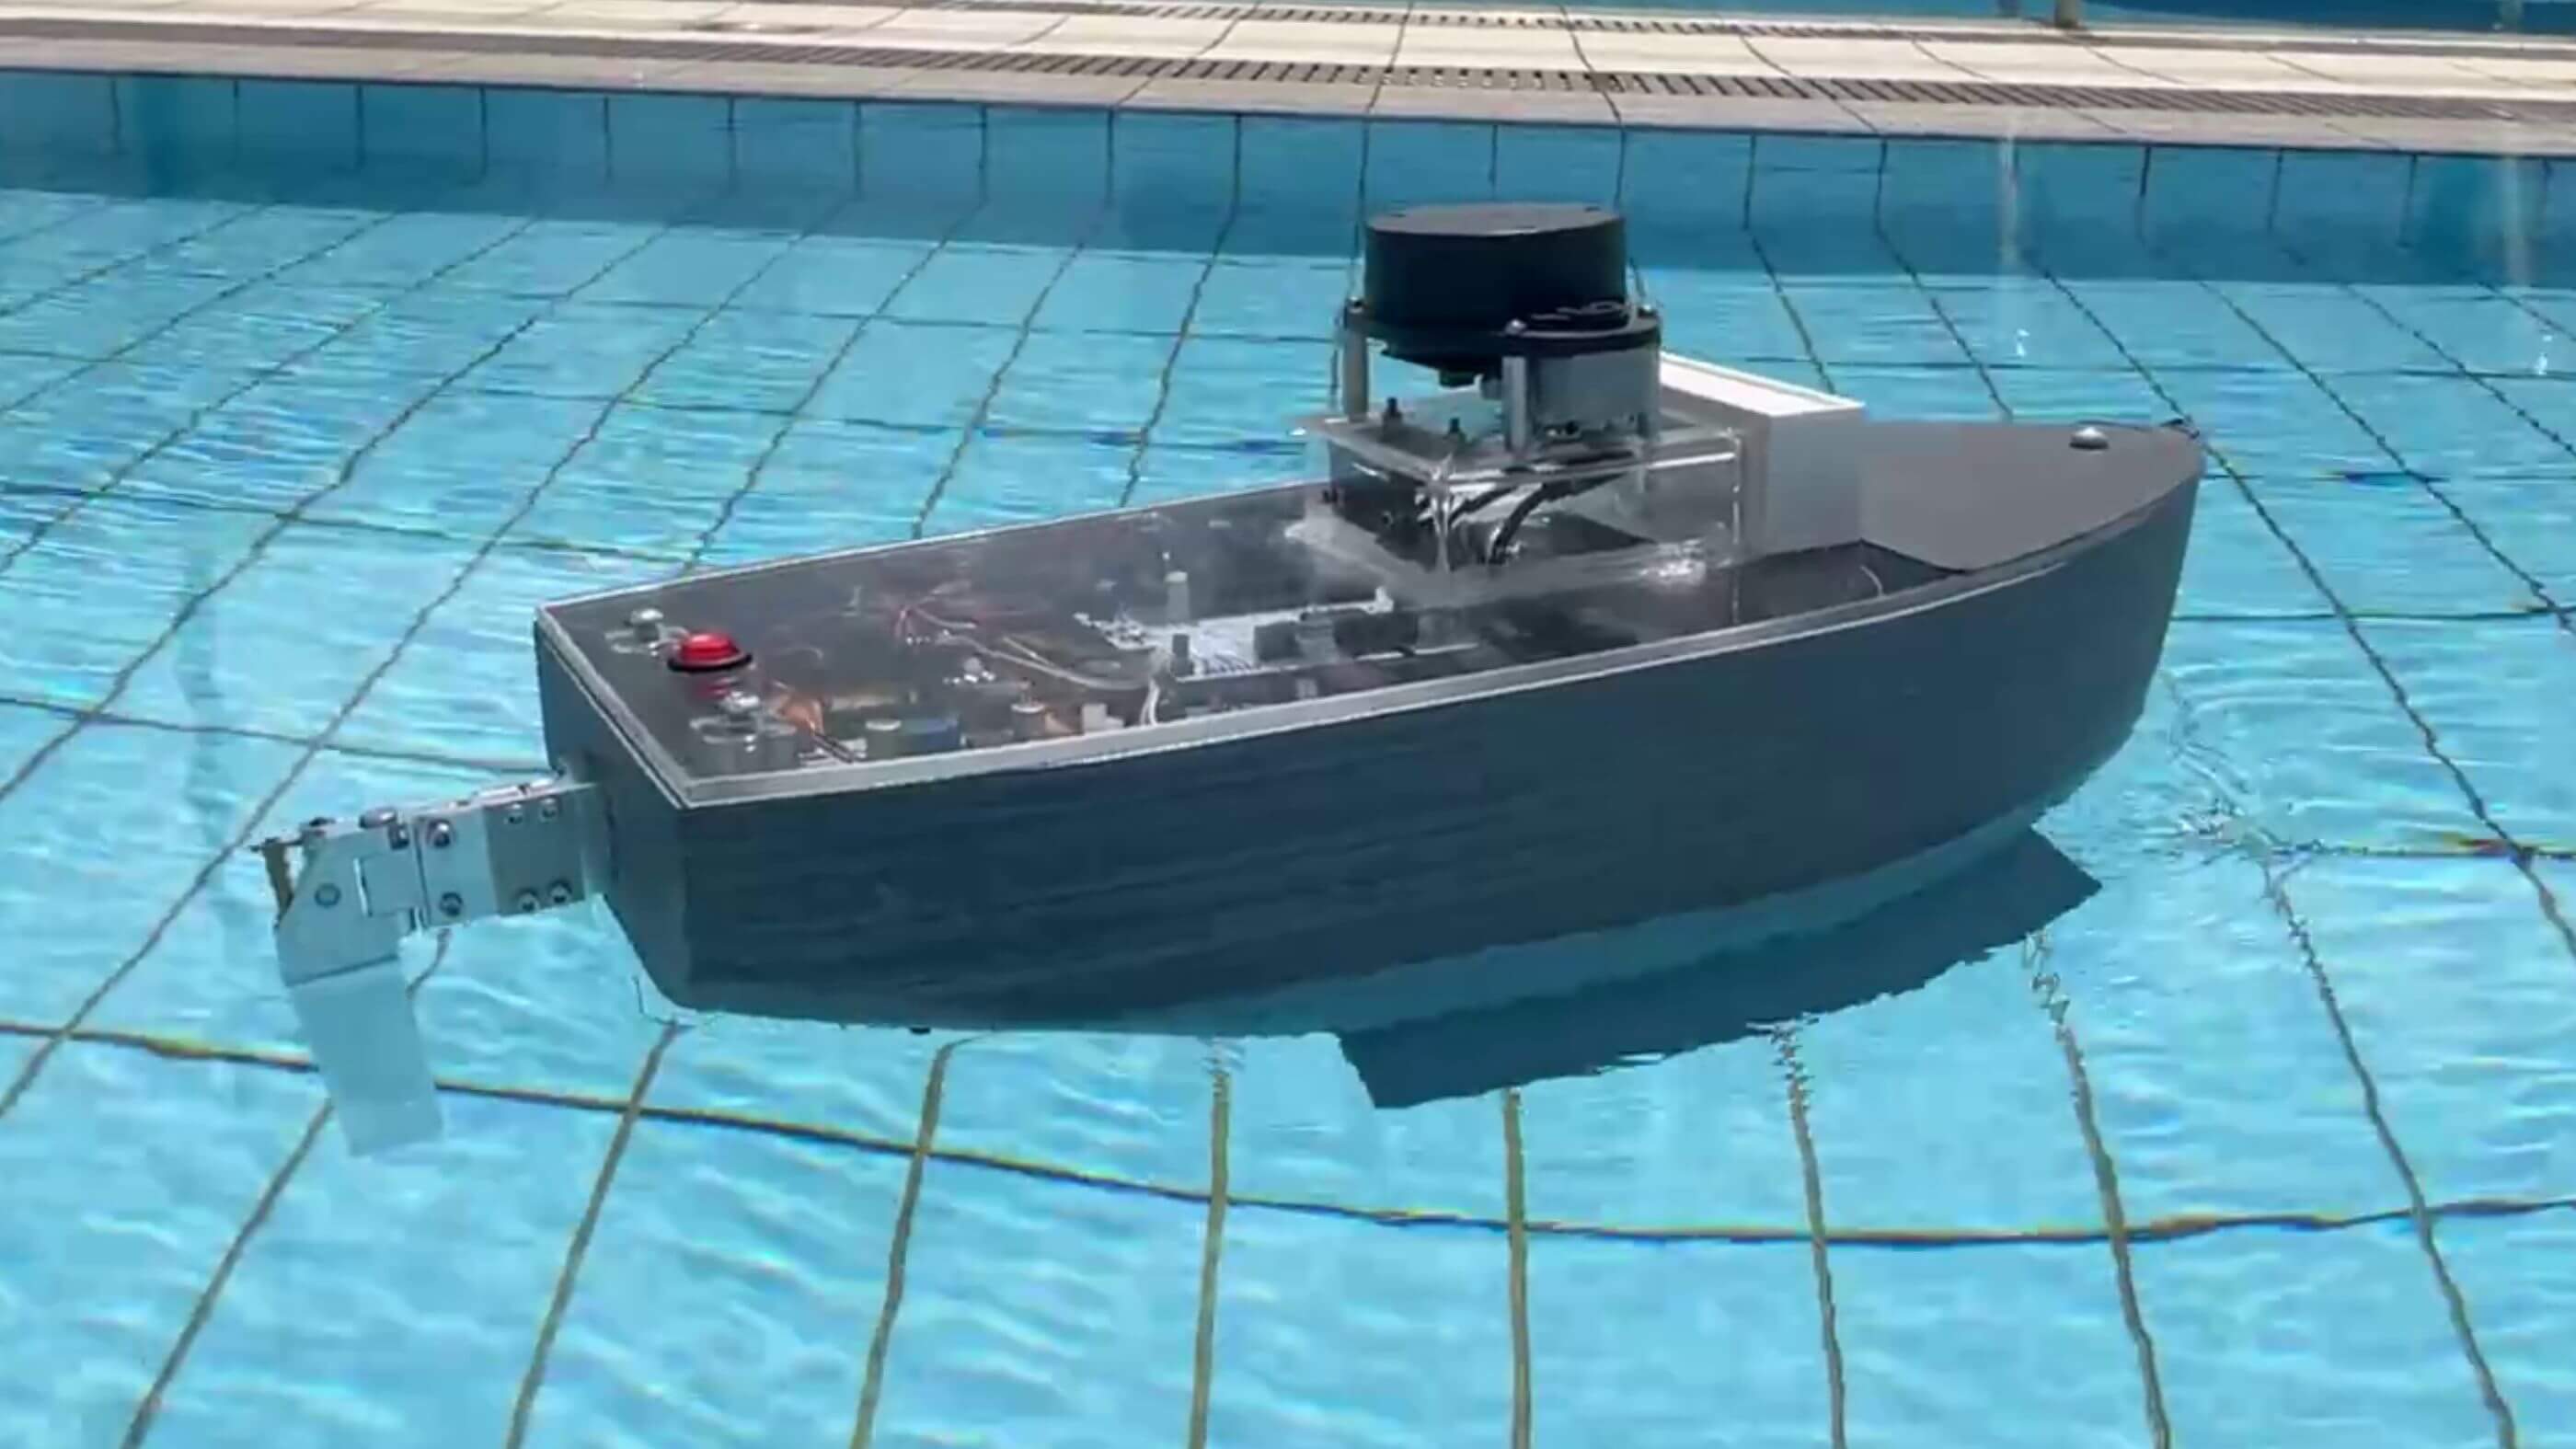 A student-created craft that resembles a boat floats in a pool